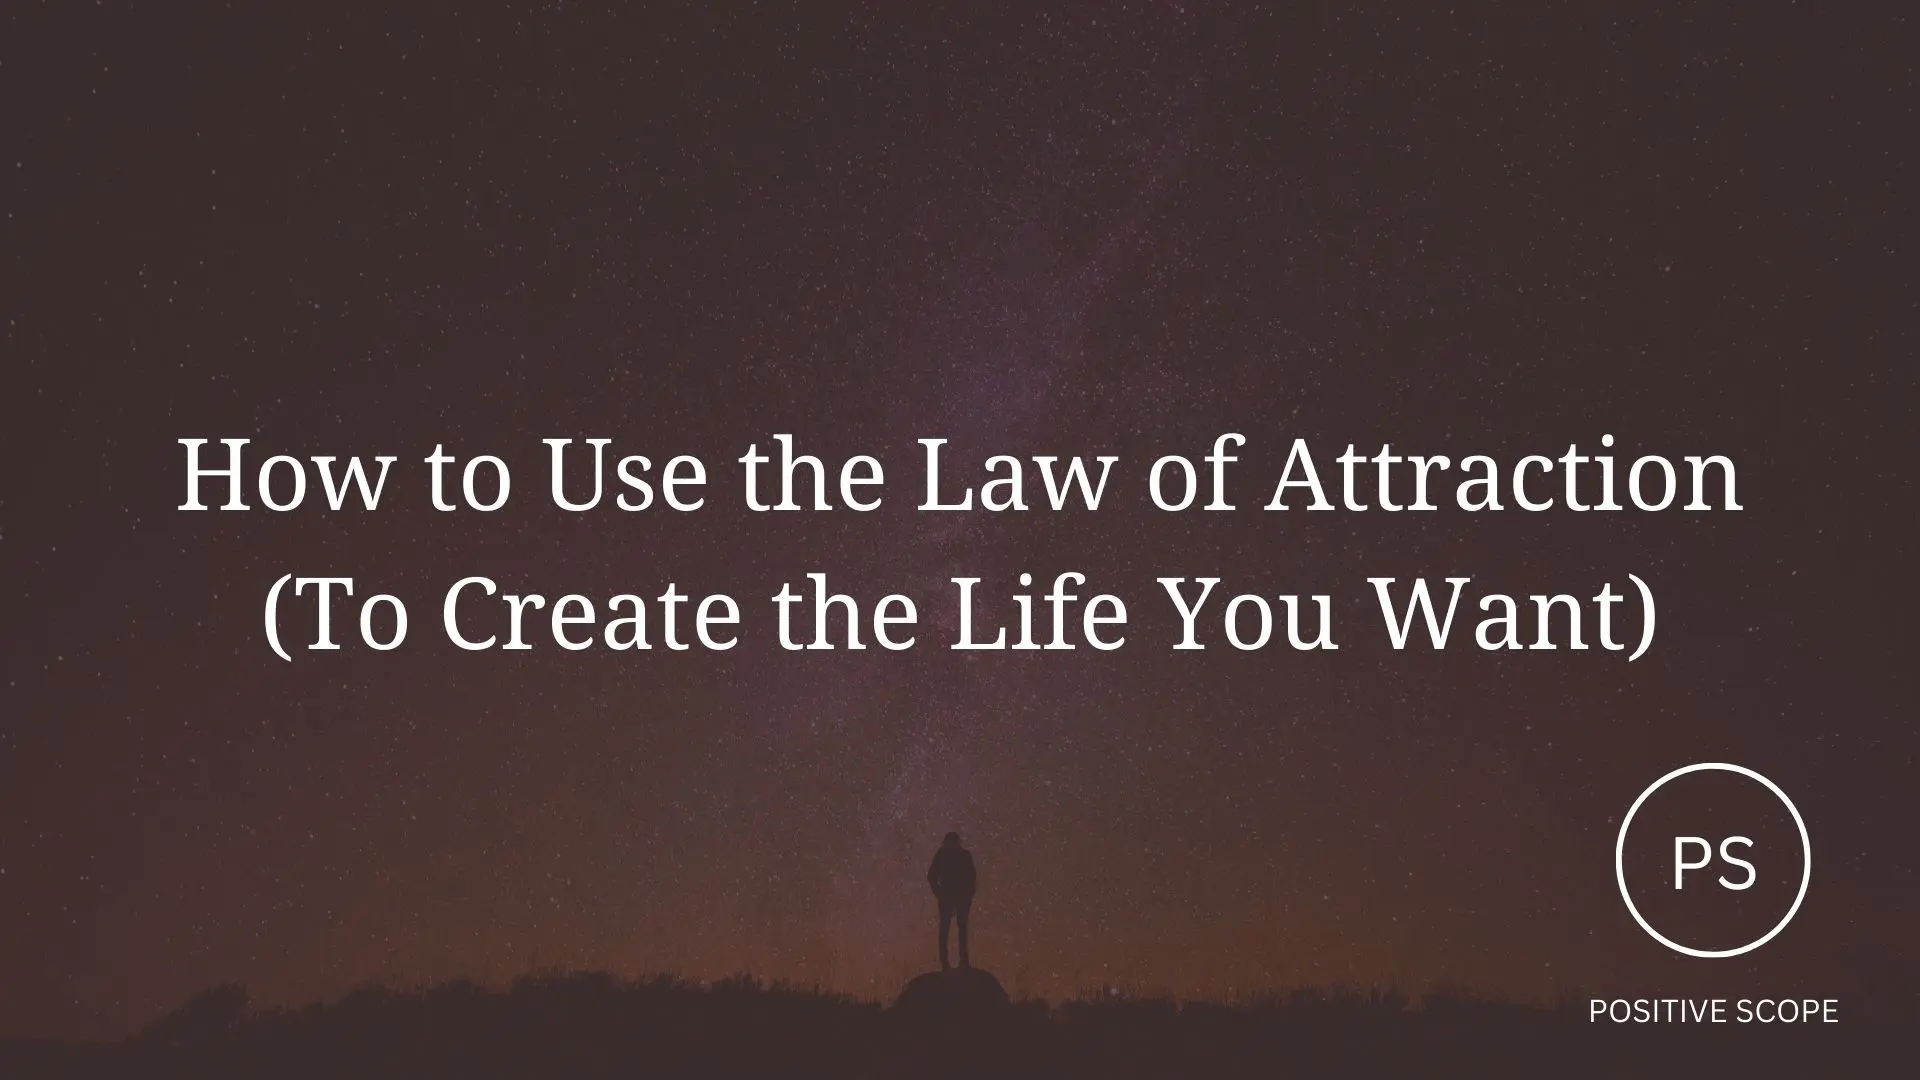 How to Use the Law of Attraction (To Create the Life You Want)